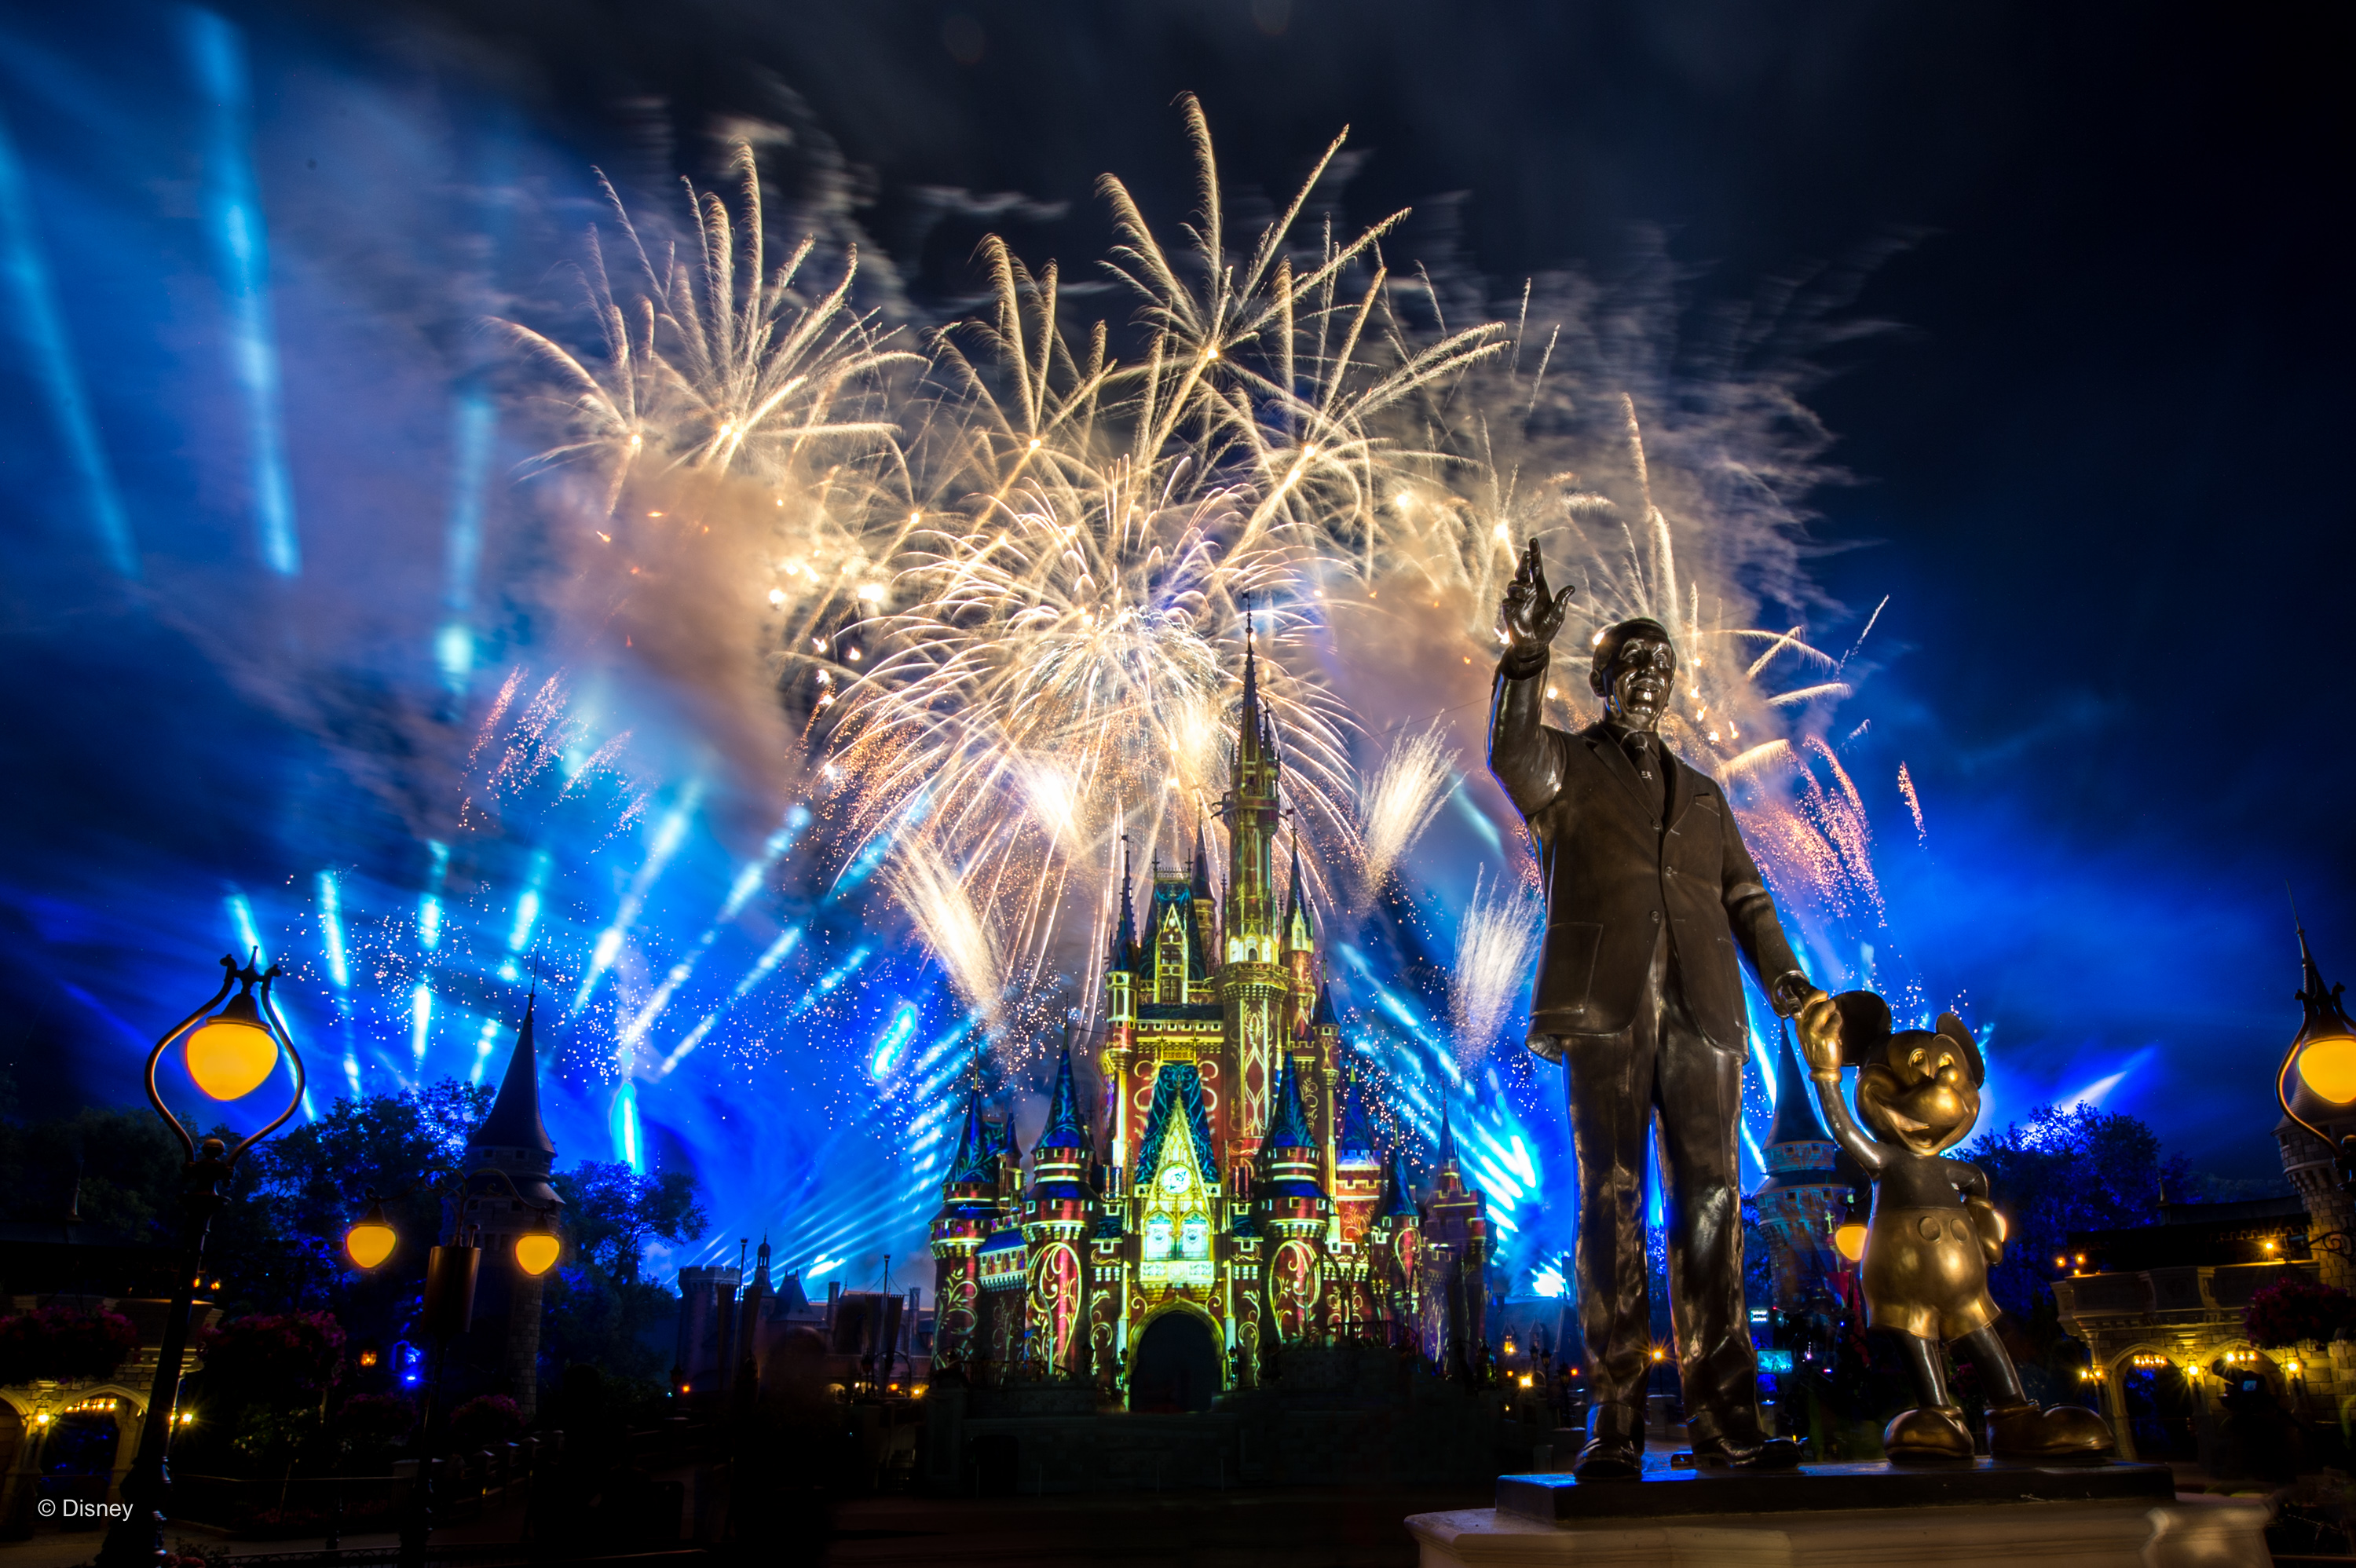 Happily Ever After fireworks- new rides at Disney World